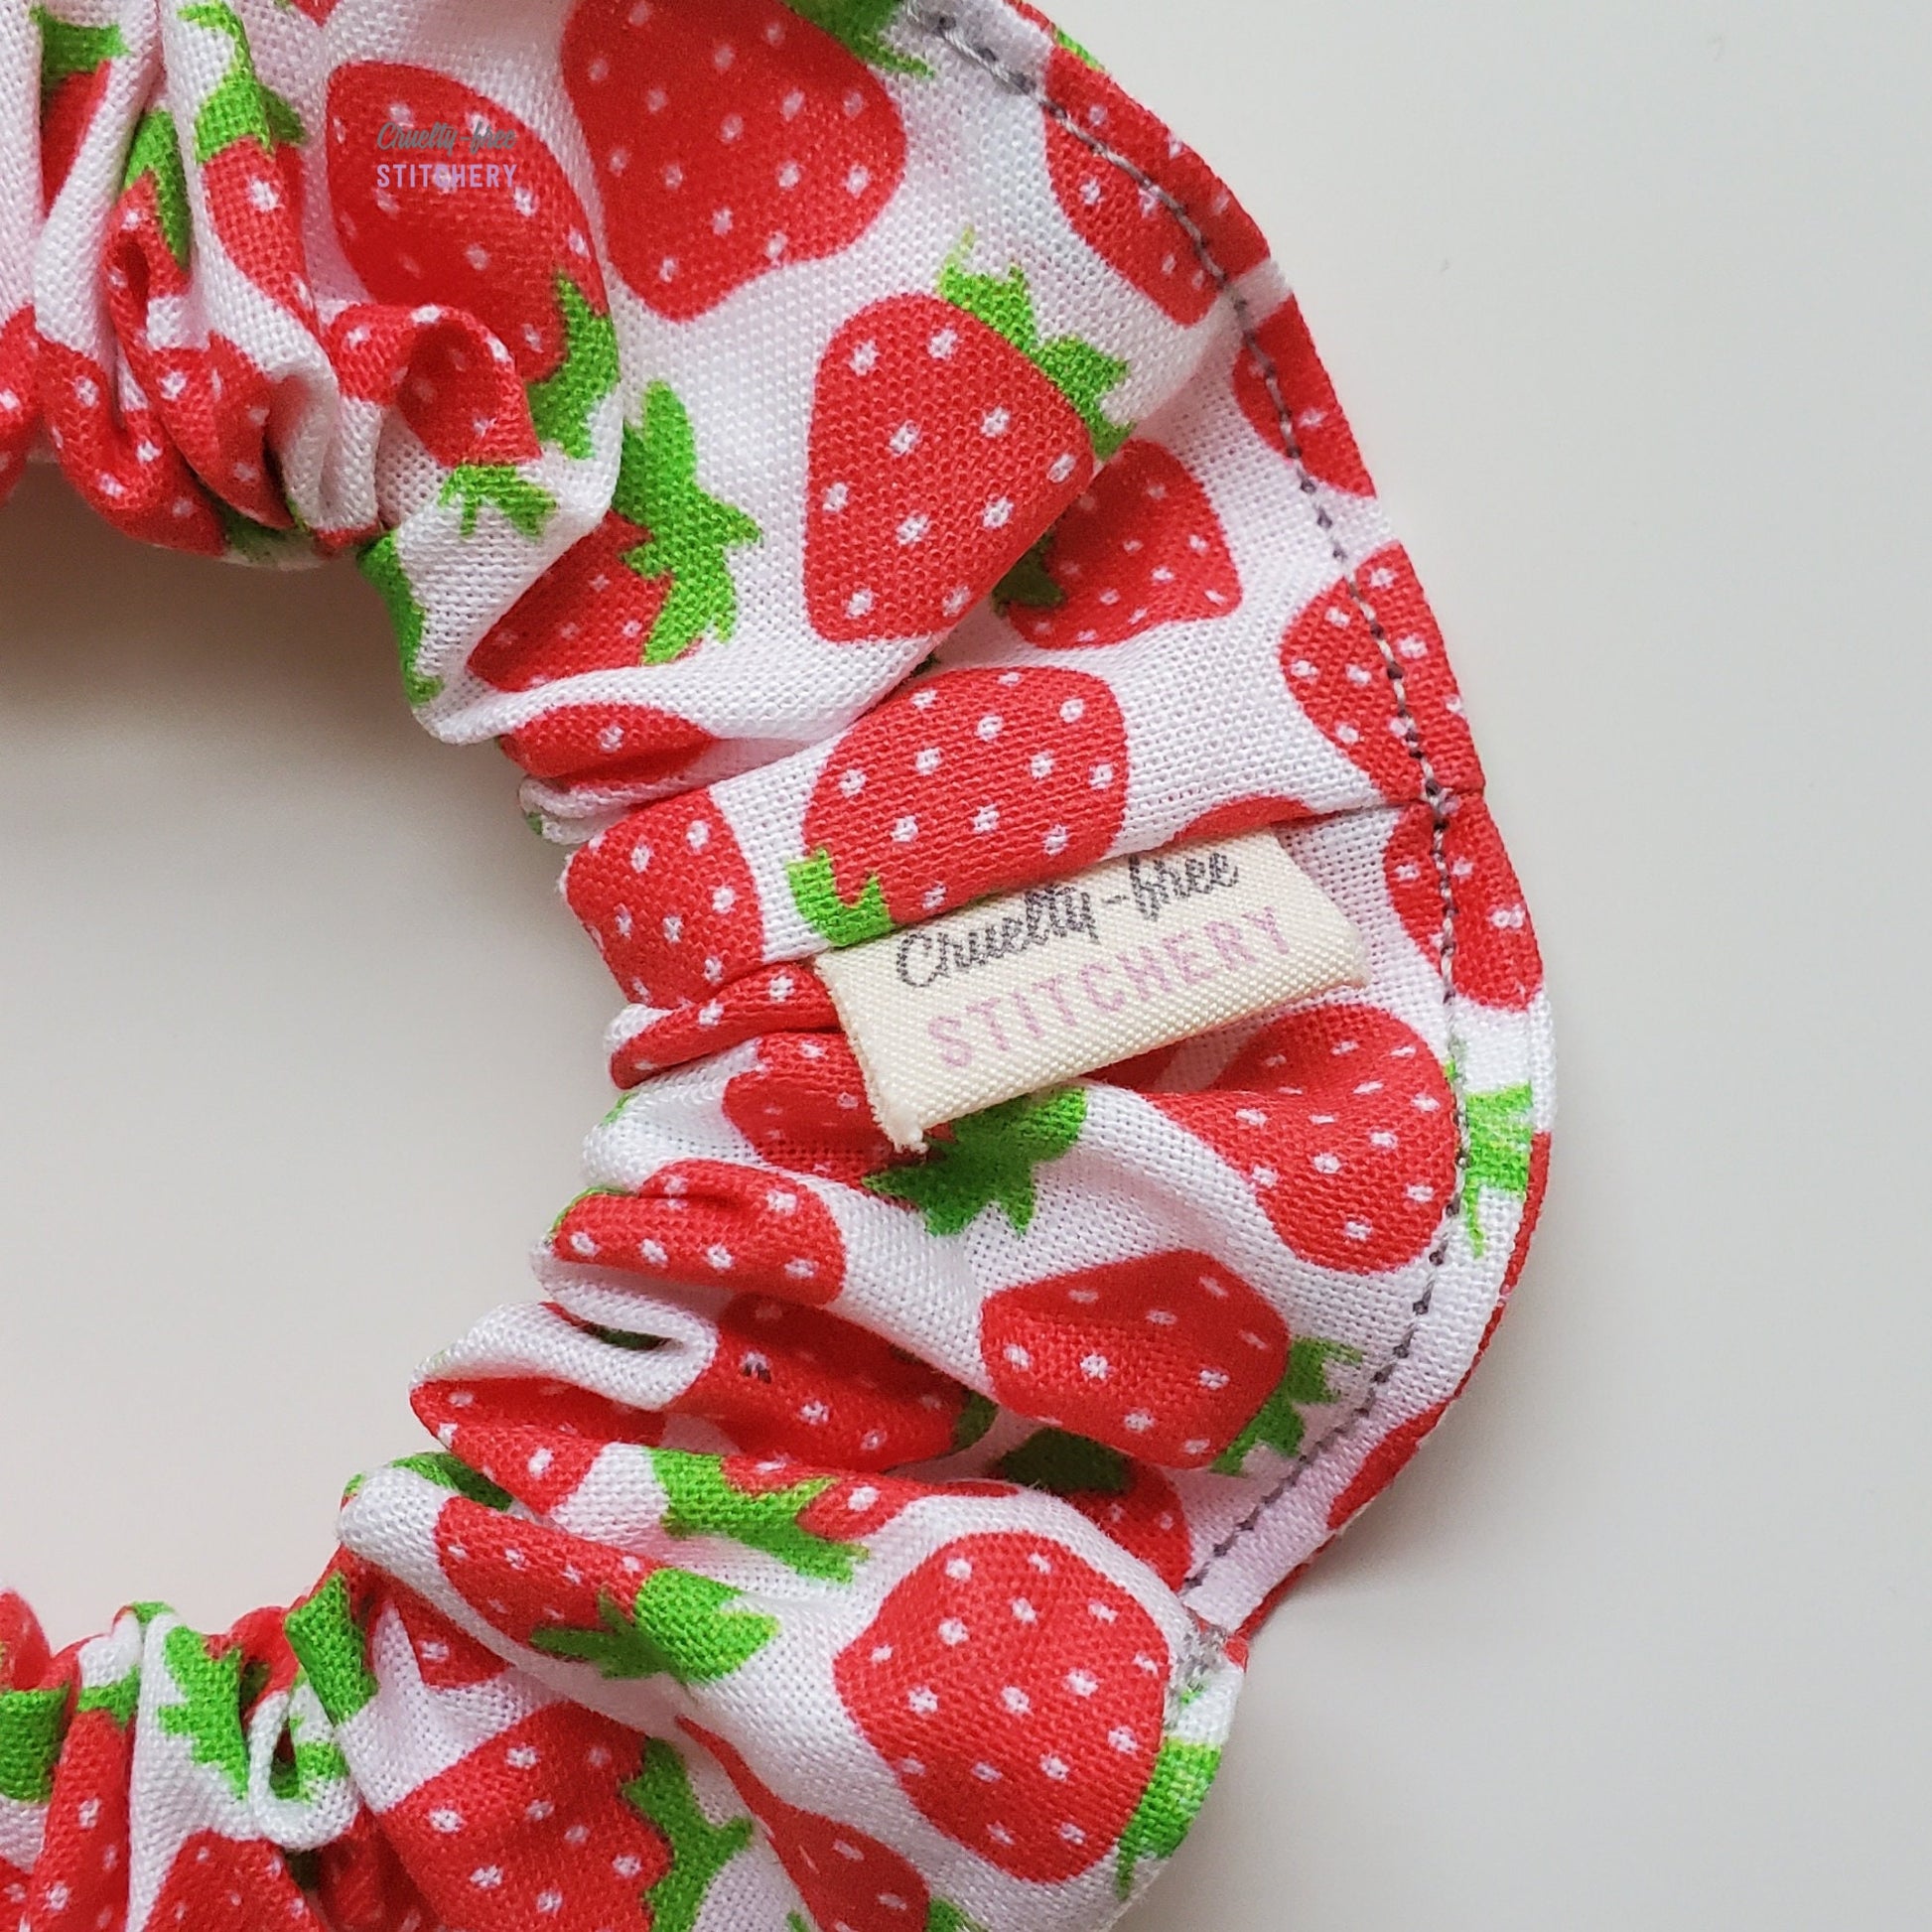 Close-up image of the side of the strawberry print scrunchie, with a small tag in the seam that has the Cruelty-Free Stitchery logo.